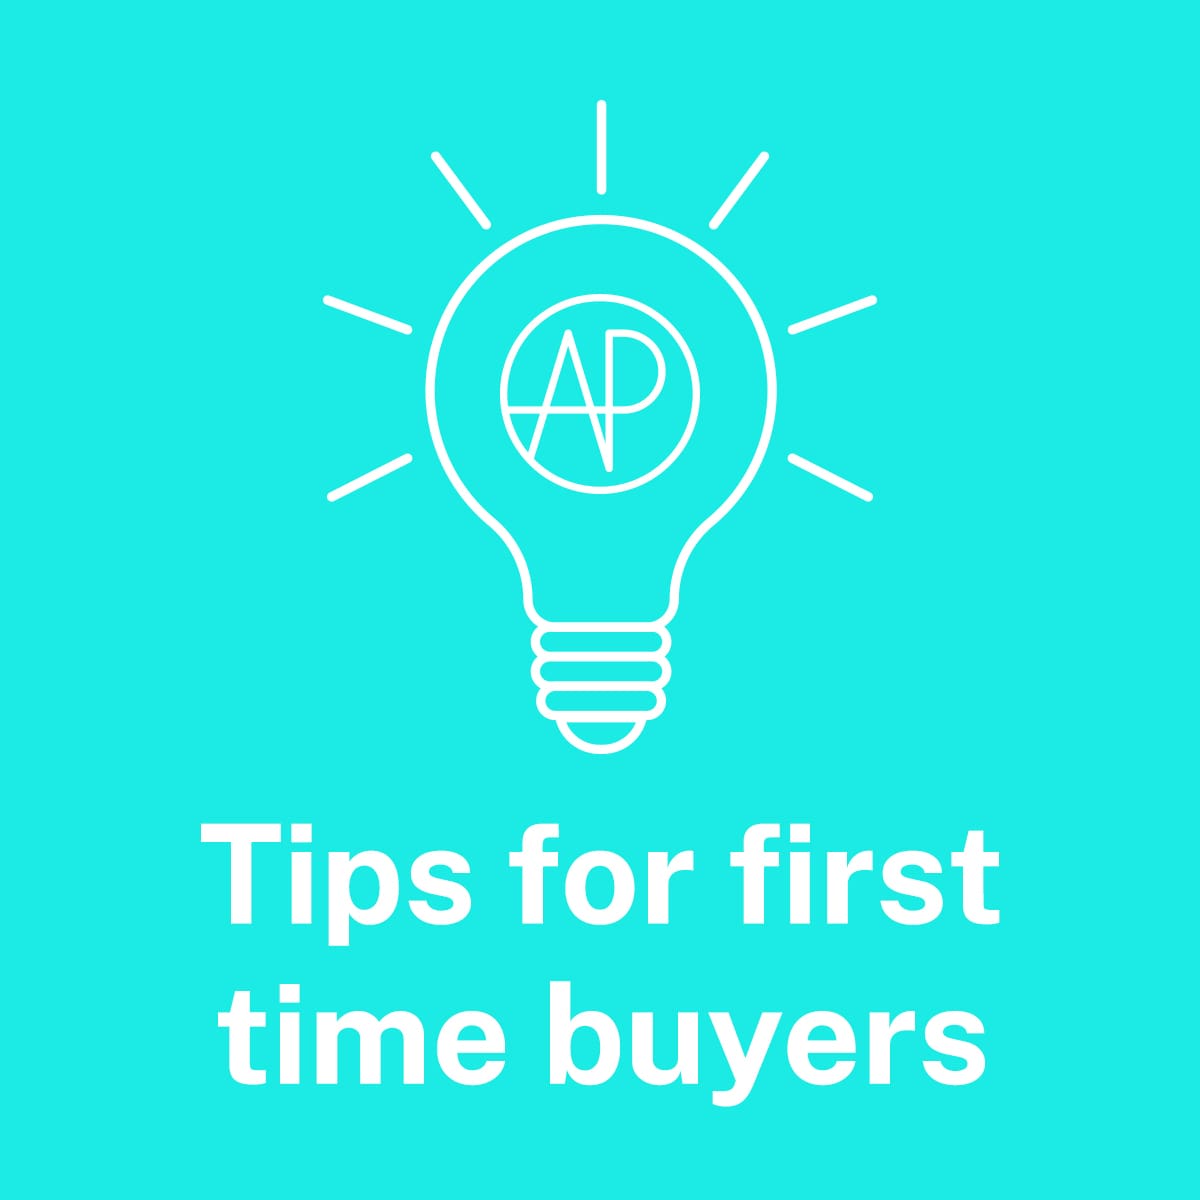 Tips for first time buyers